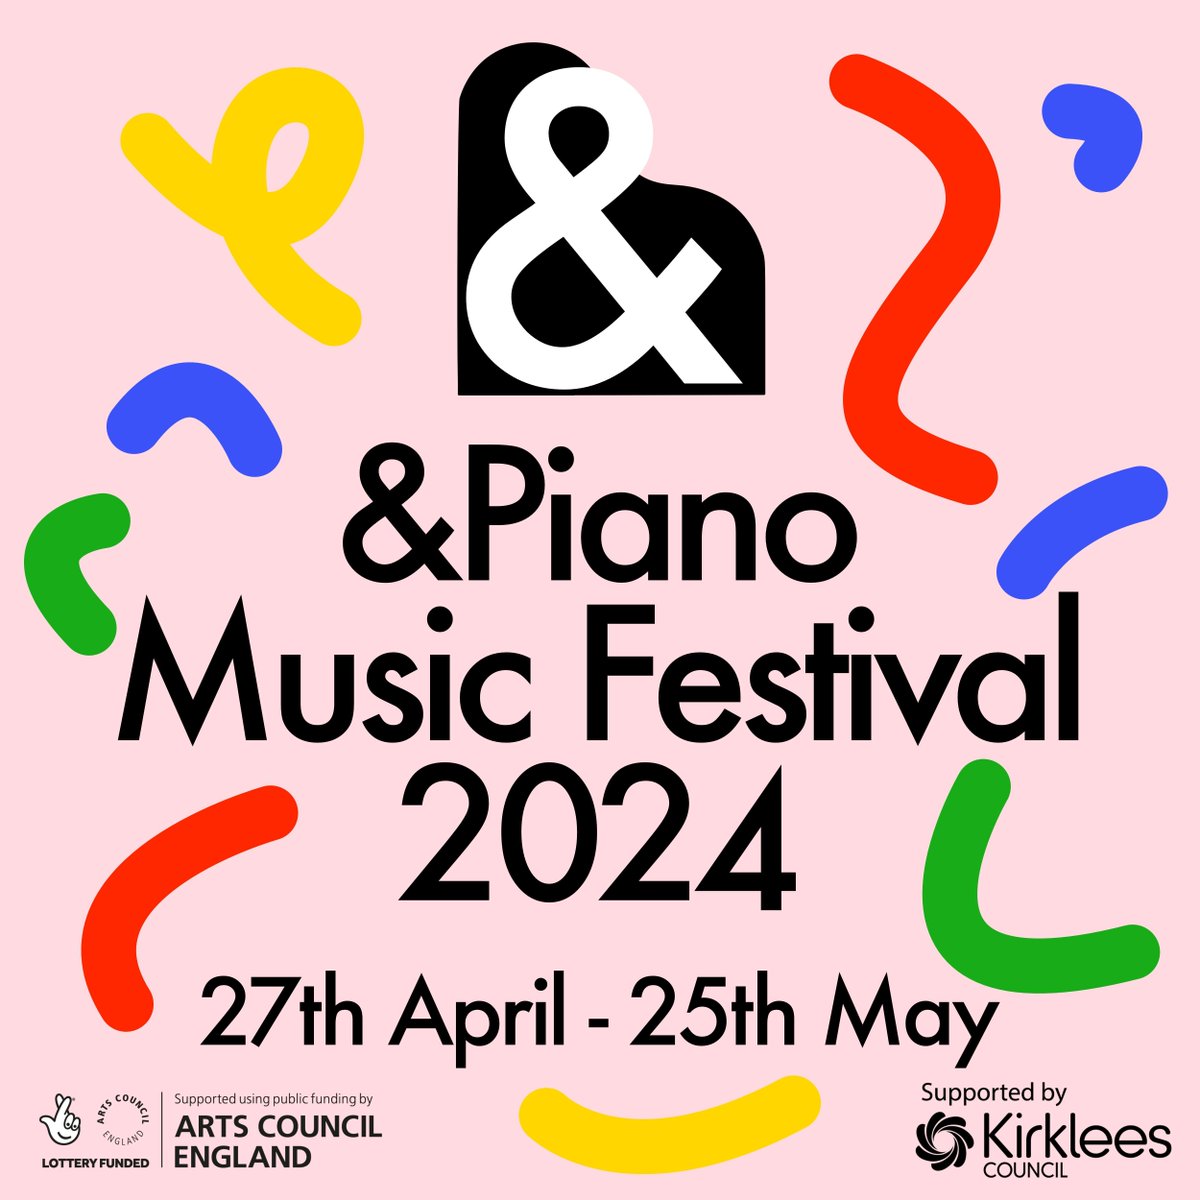 Introducing &Piano Music Festival 2024 - an exciting festival of live classical music featuring exceptional music and musicians. We'll be announcing events this week, so stayed tuned and make sure you join us, starting from April 27th until May 25th! @cr8tivekirklees